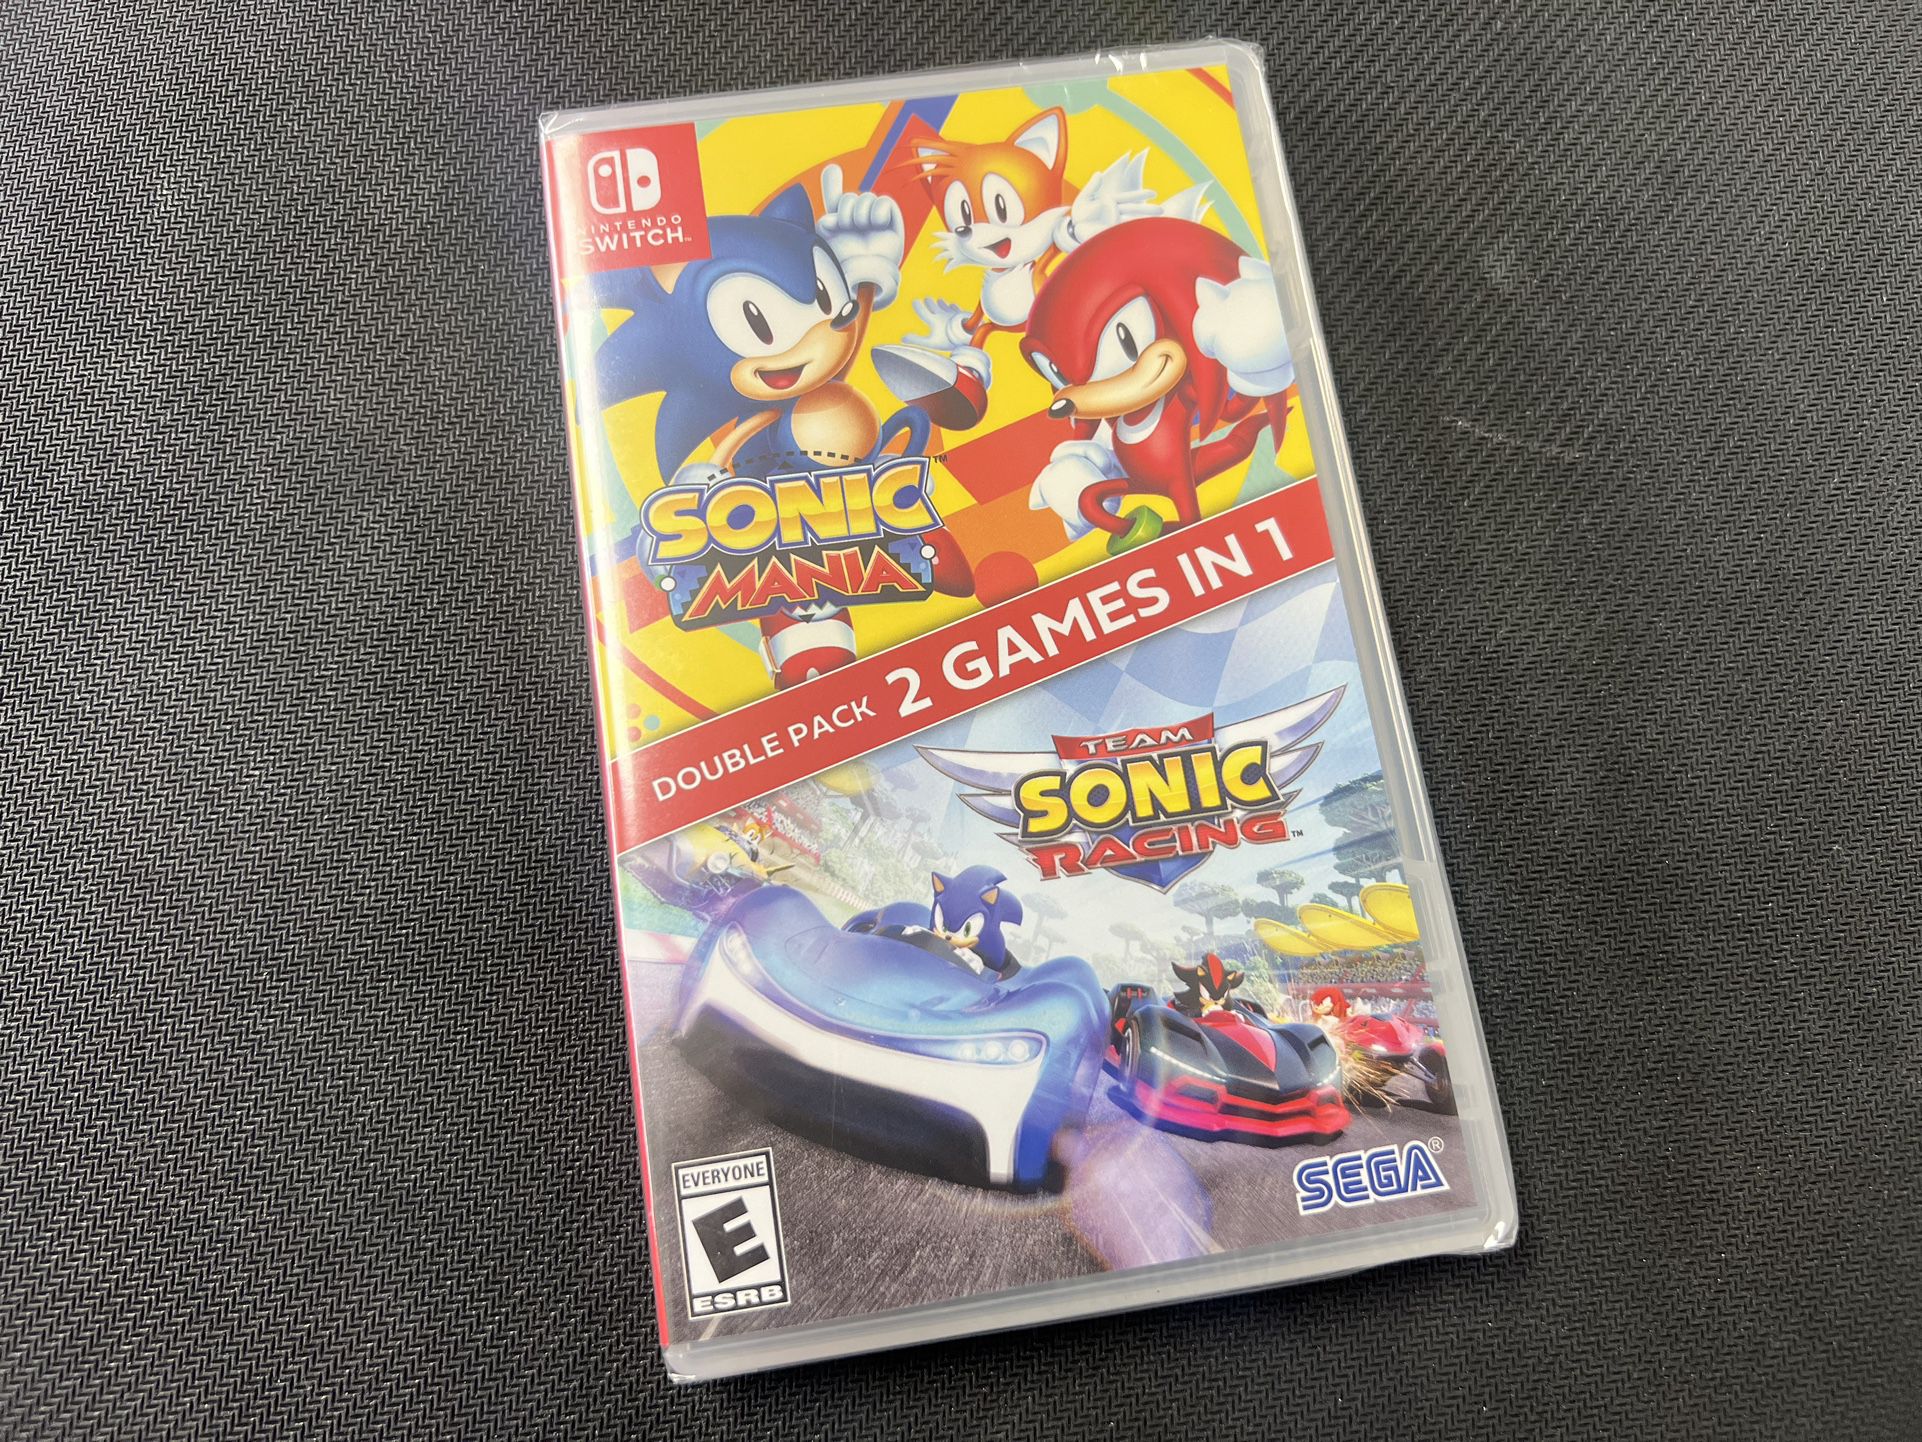 NSW Sonic Mania + Team Sonic Racing Double Pack - Nintendo Switch 